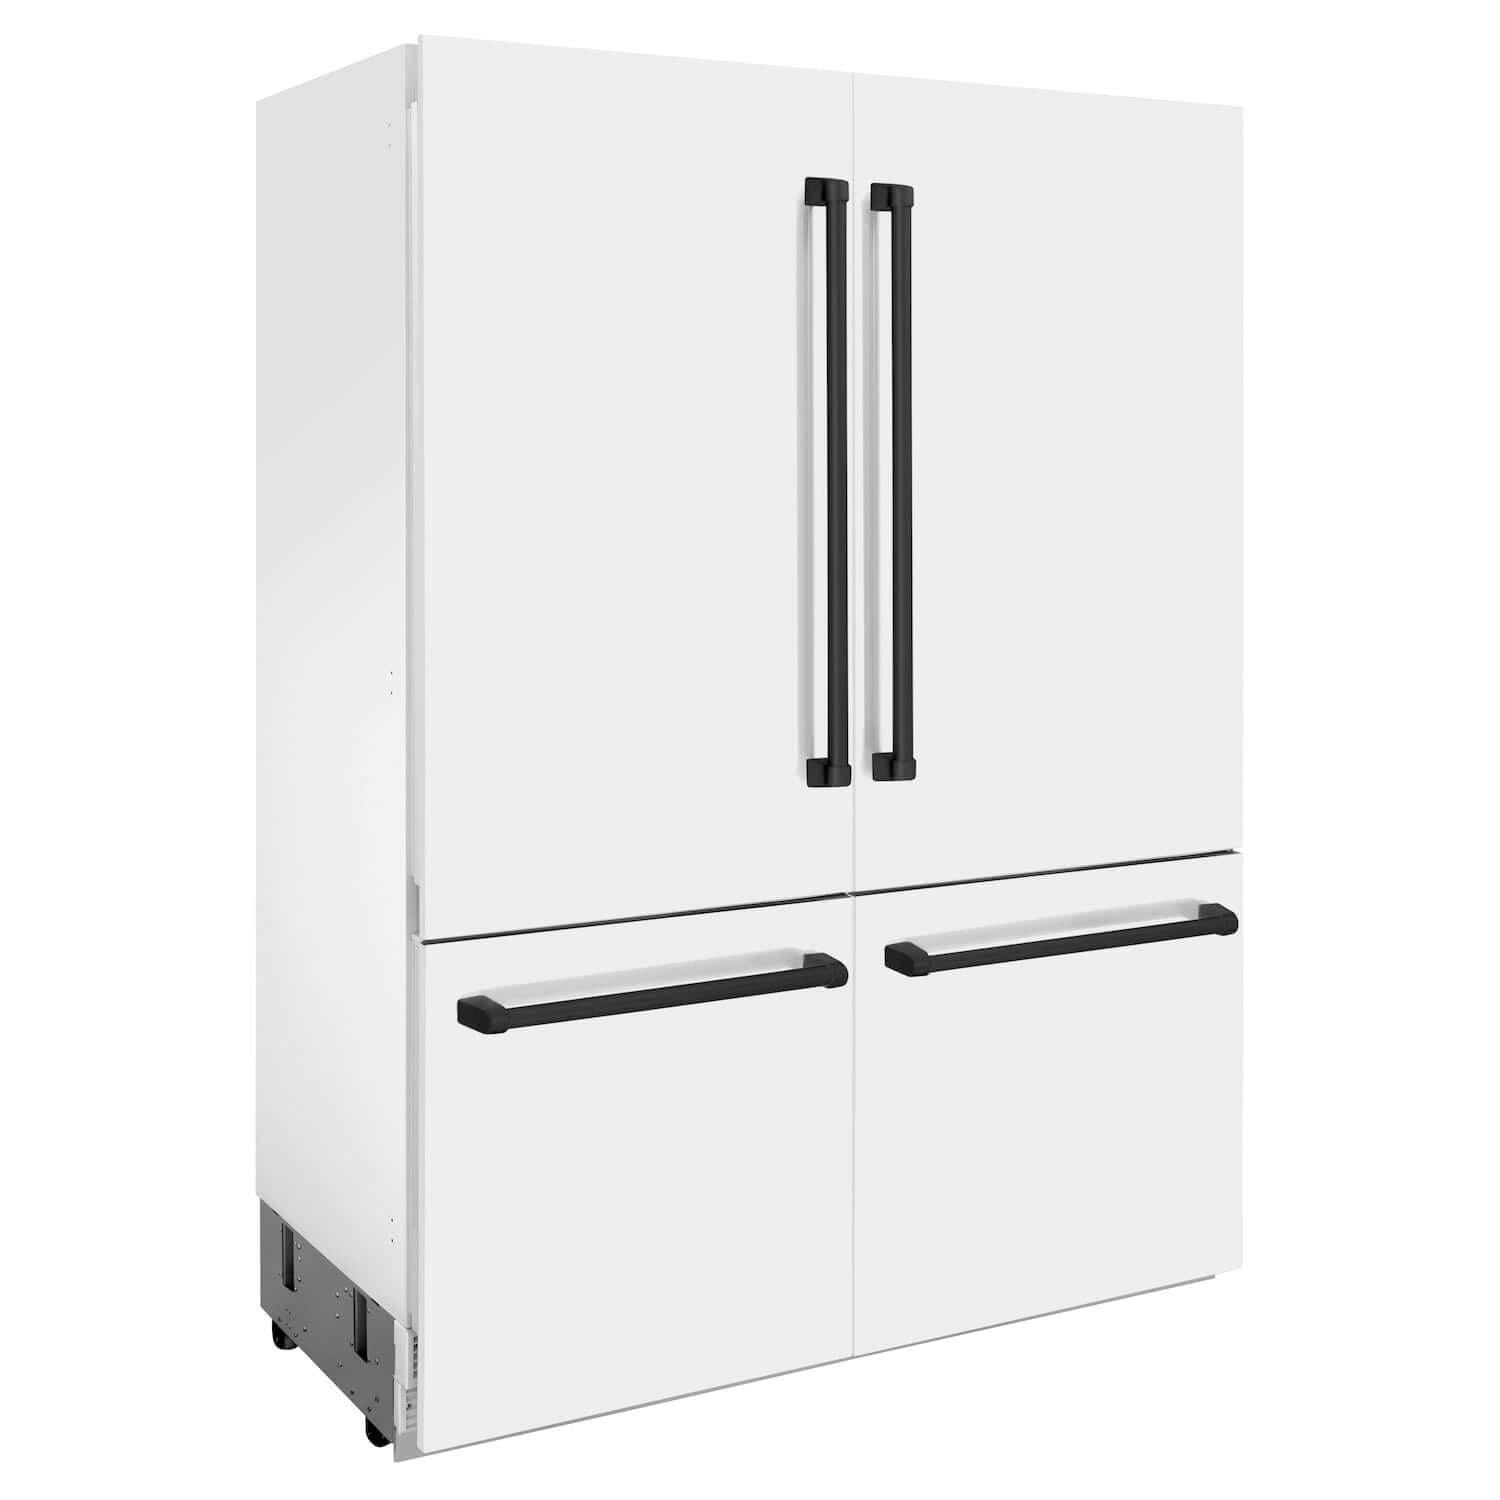 ZLINE 60" Autograph Edition 32.2 cu. ft. Built-in 4-Door French Door Refrigerator with Internal Water and Ice Dispenser in White Matte with Matte Black Accents (RBIVZ-WM-60-MB)